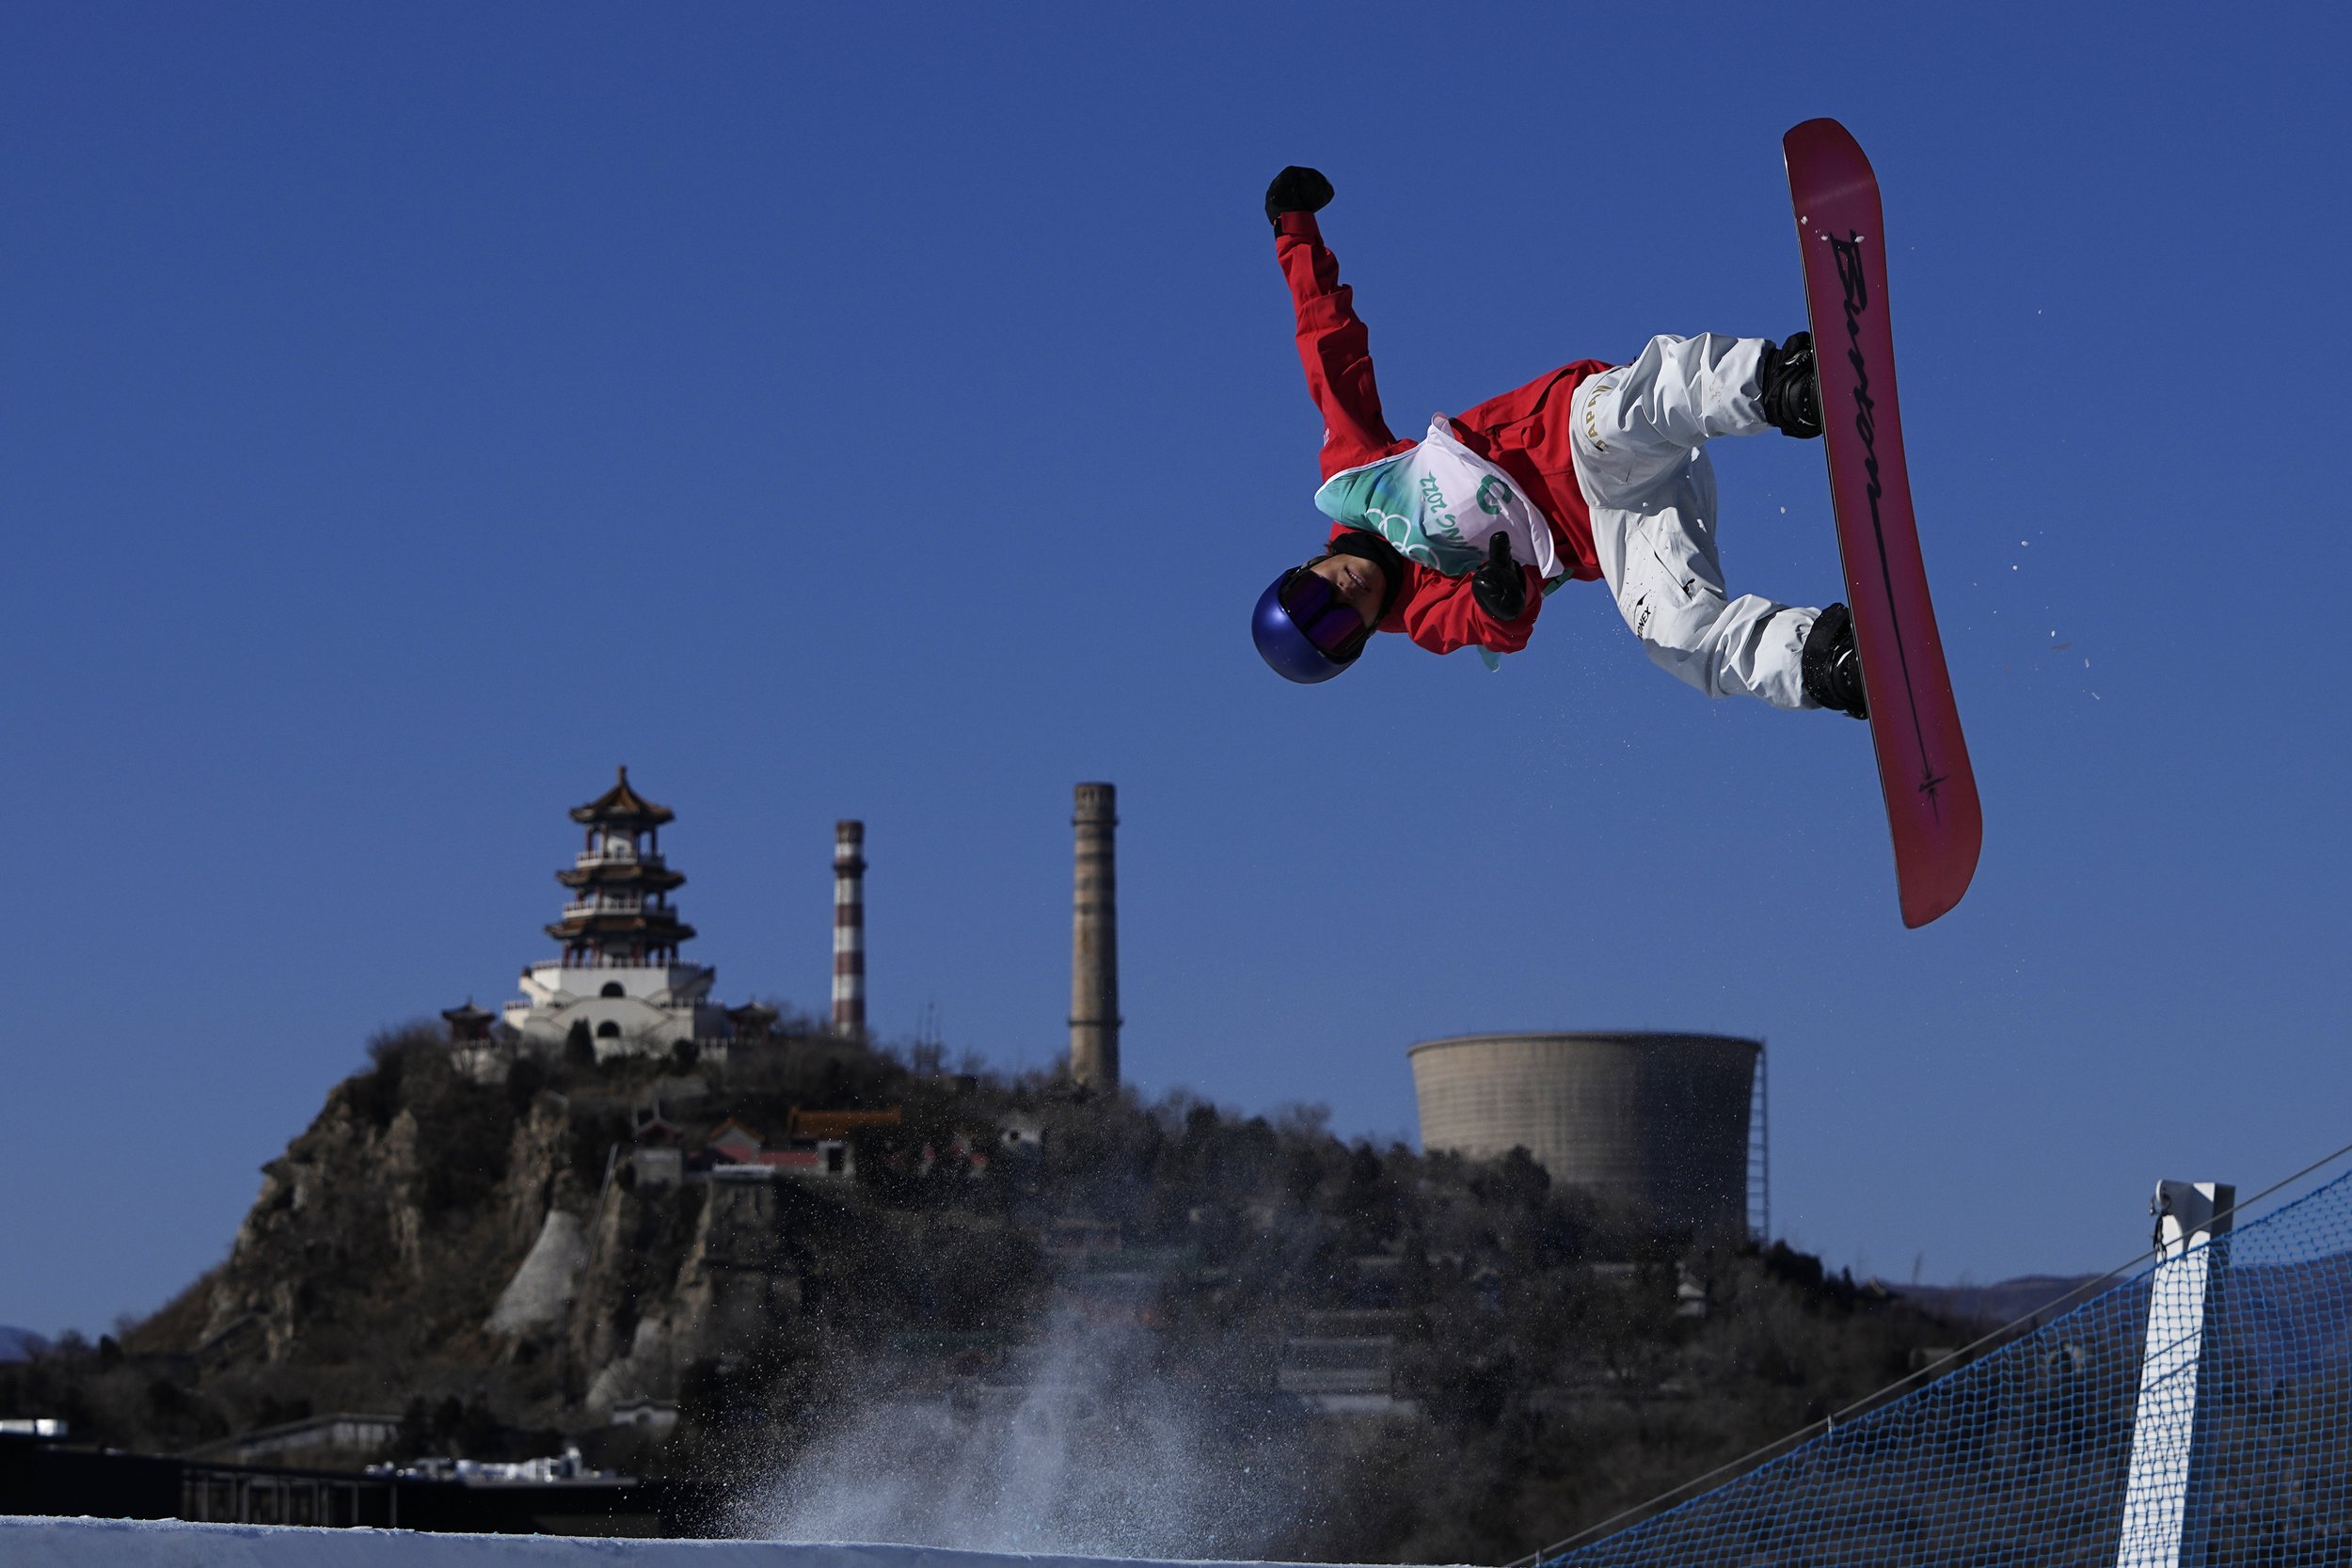  Takeru Otsuka of Japan competes during the men's snowboard big air qualifications of the 2022 Winter Olympics, Monday, Feb. 14, 2022, in Beijing. (AP Photo/Jae C. Hong) 